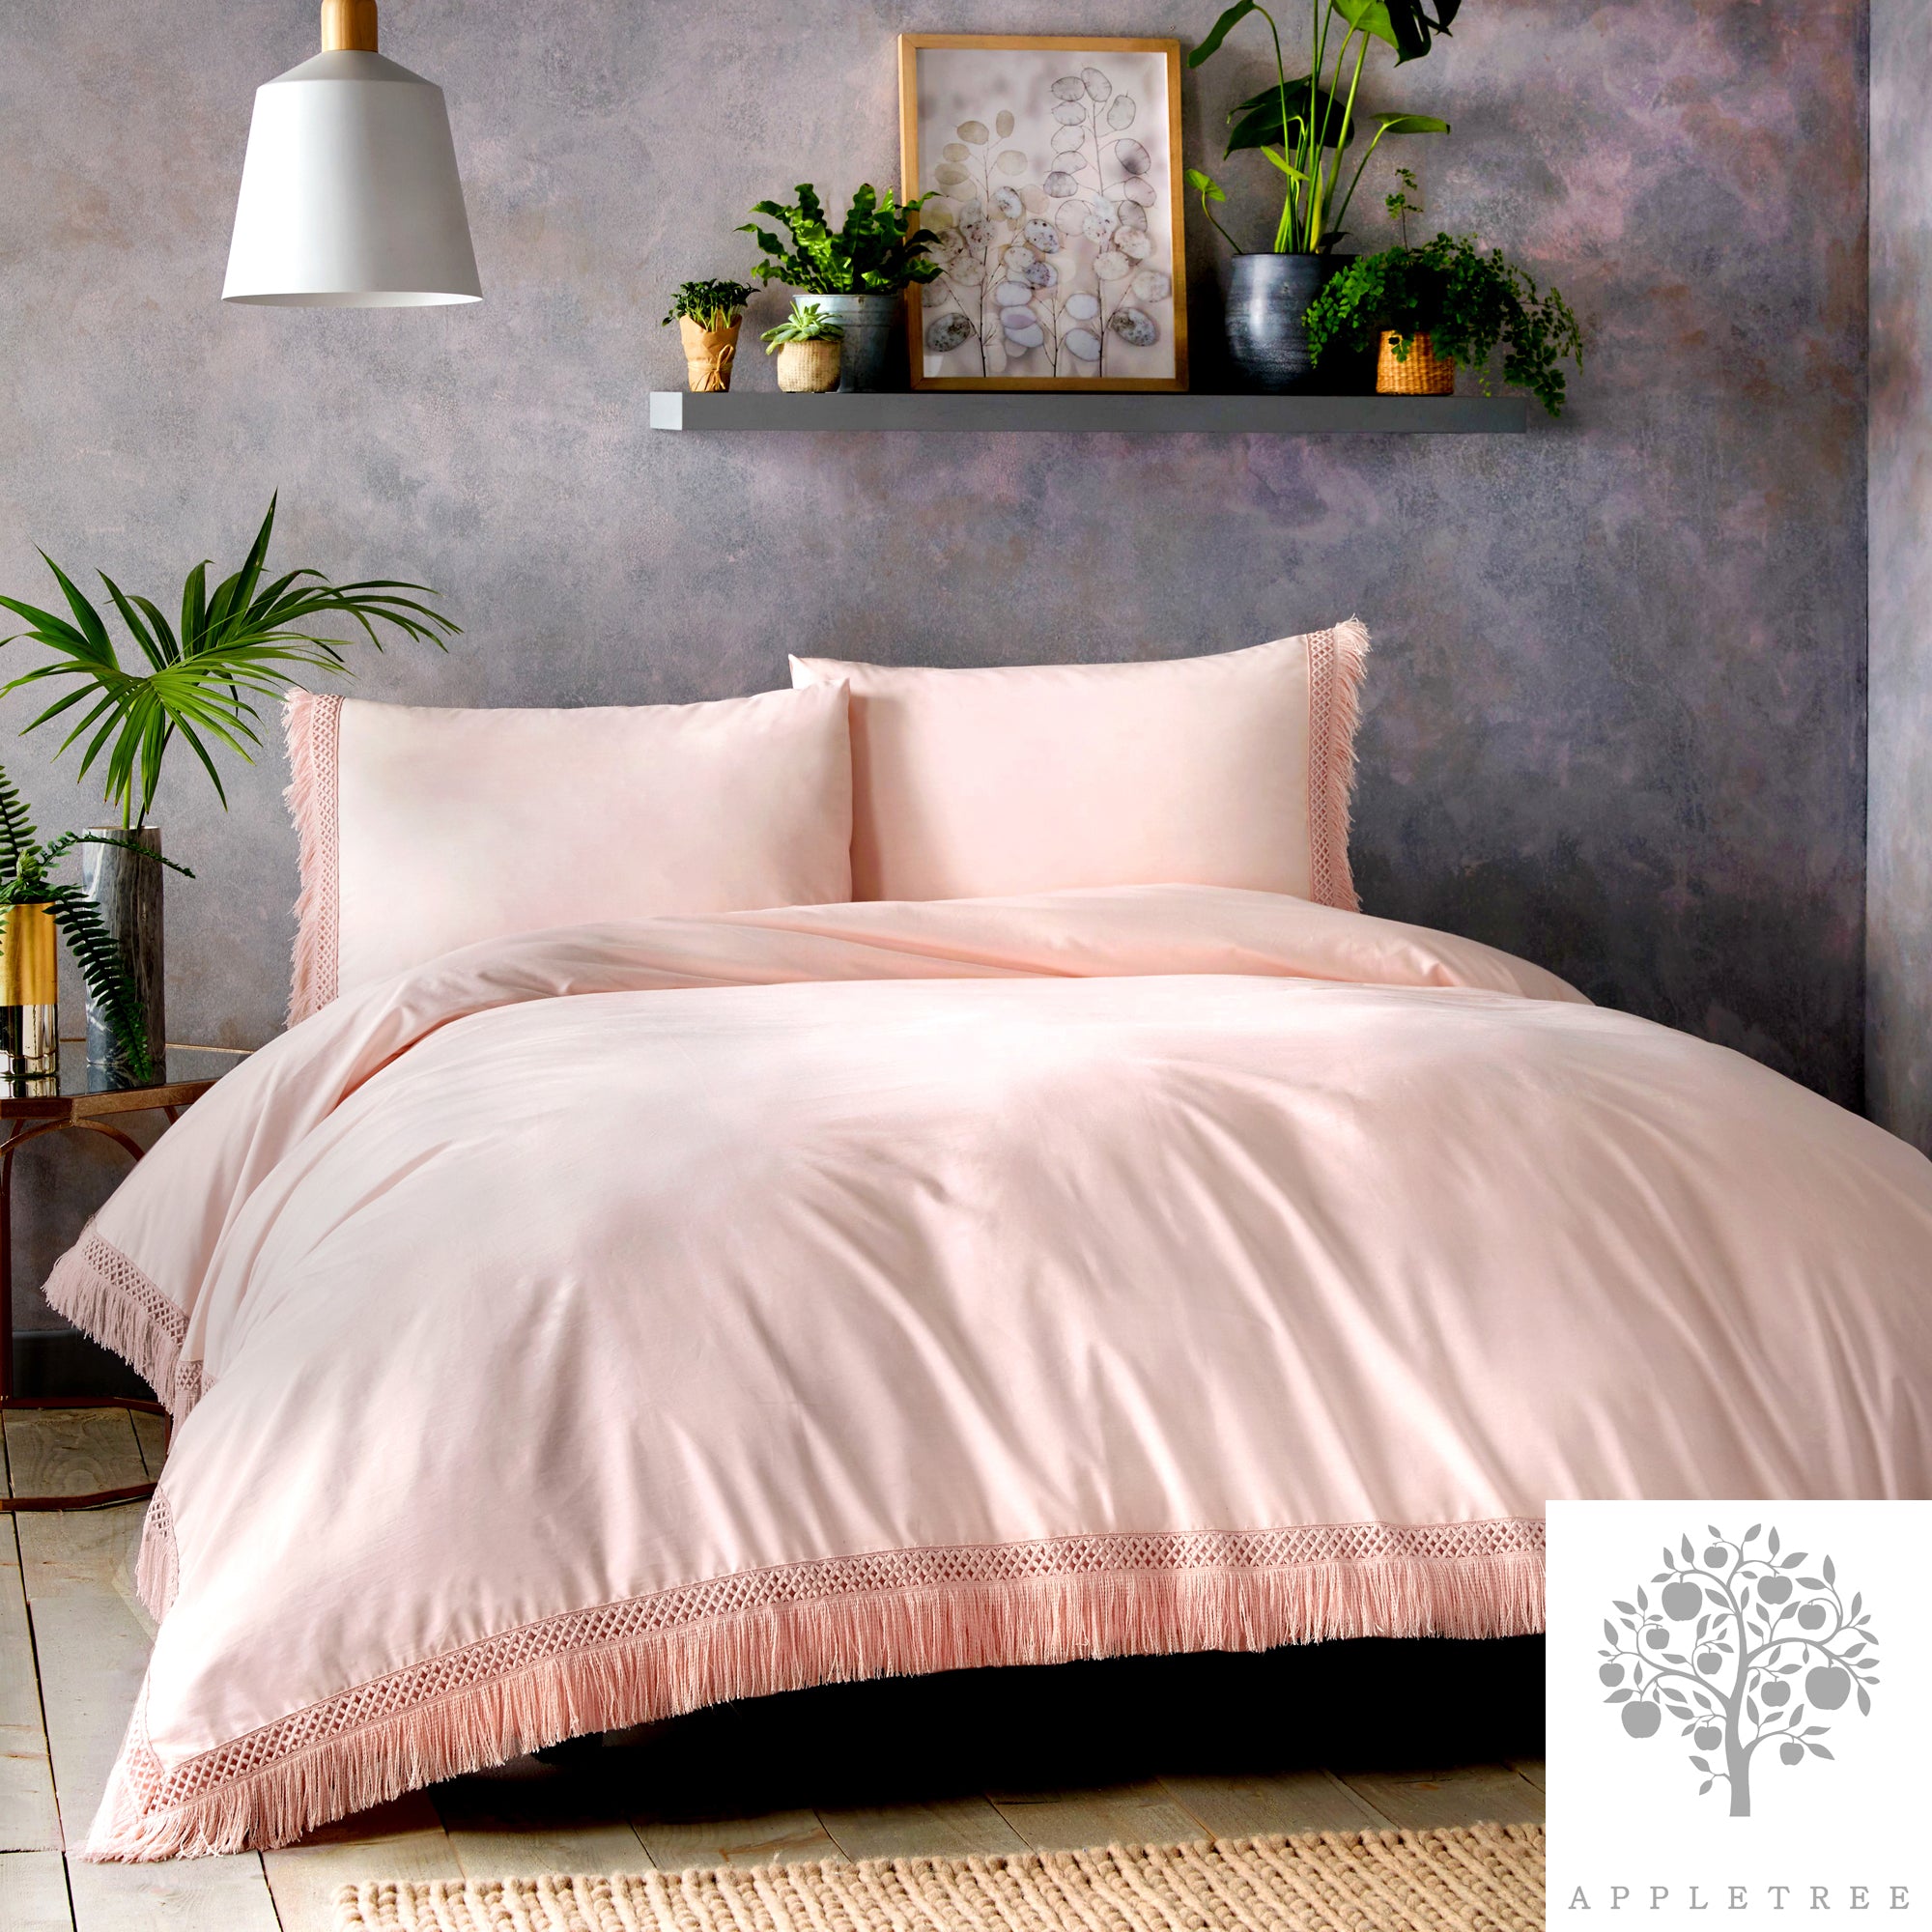 Tasha - 100% Cotton Duvet Cover Set in Pink by Appletree Boutique